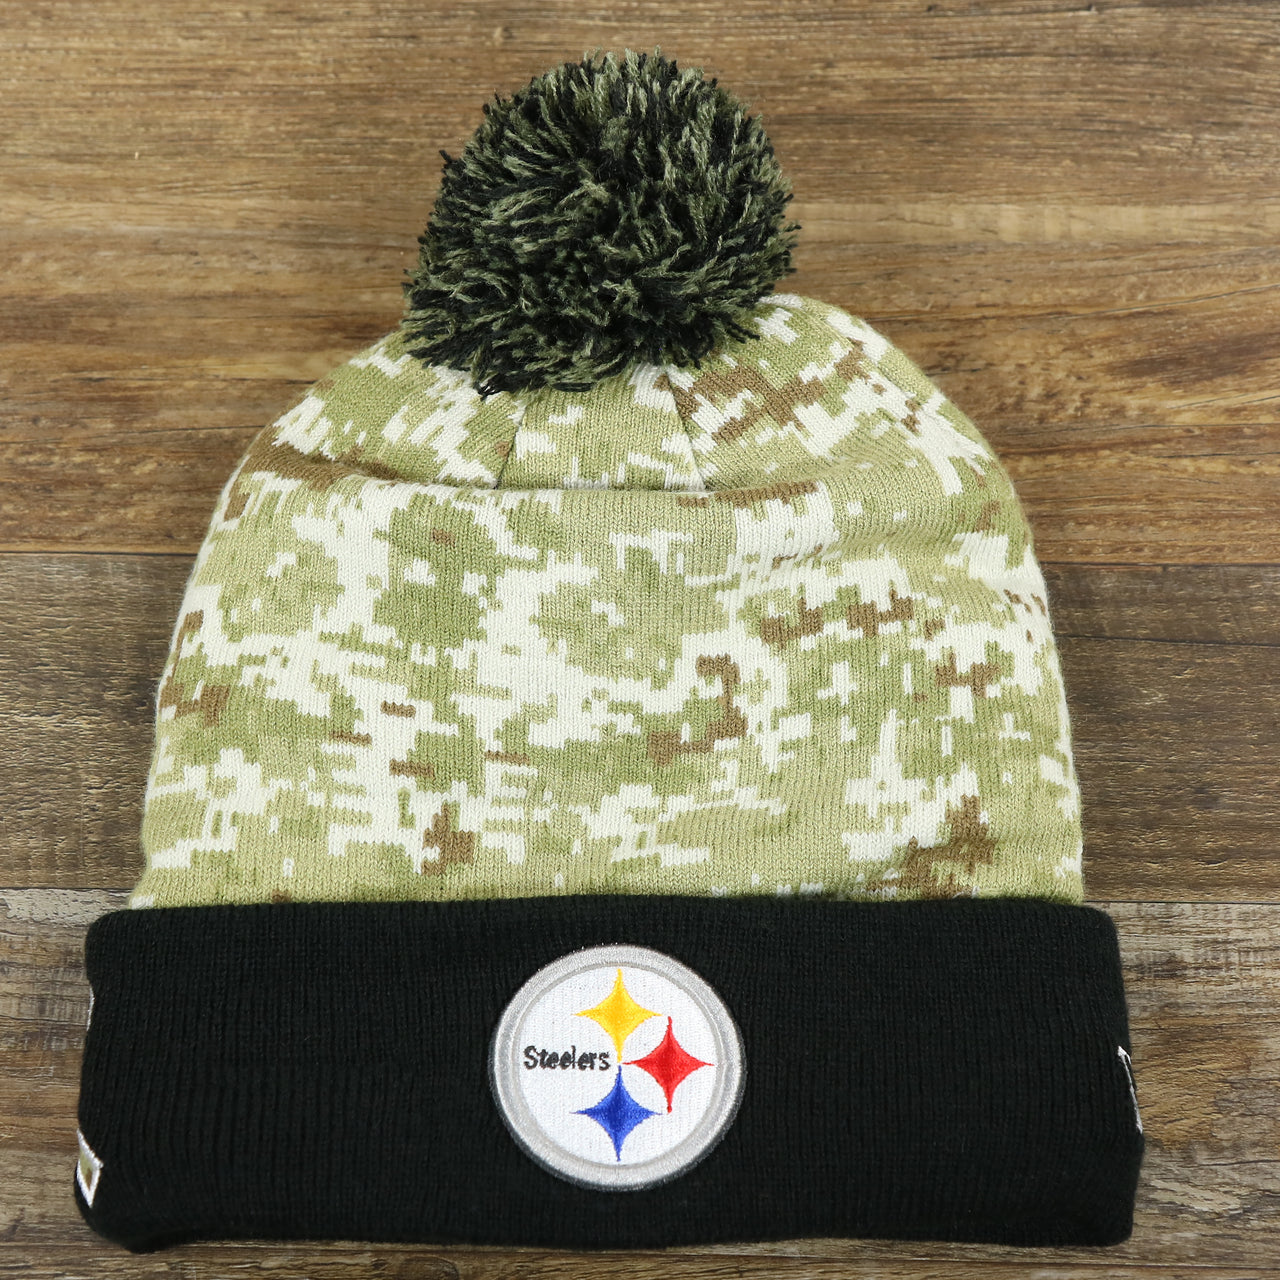 The front of the Pittsburgh Steelers NFL Salute To Service Cuffed Winter Beanie | Camo and Black Beanie